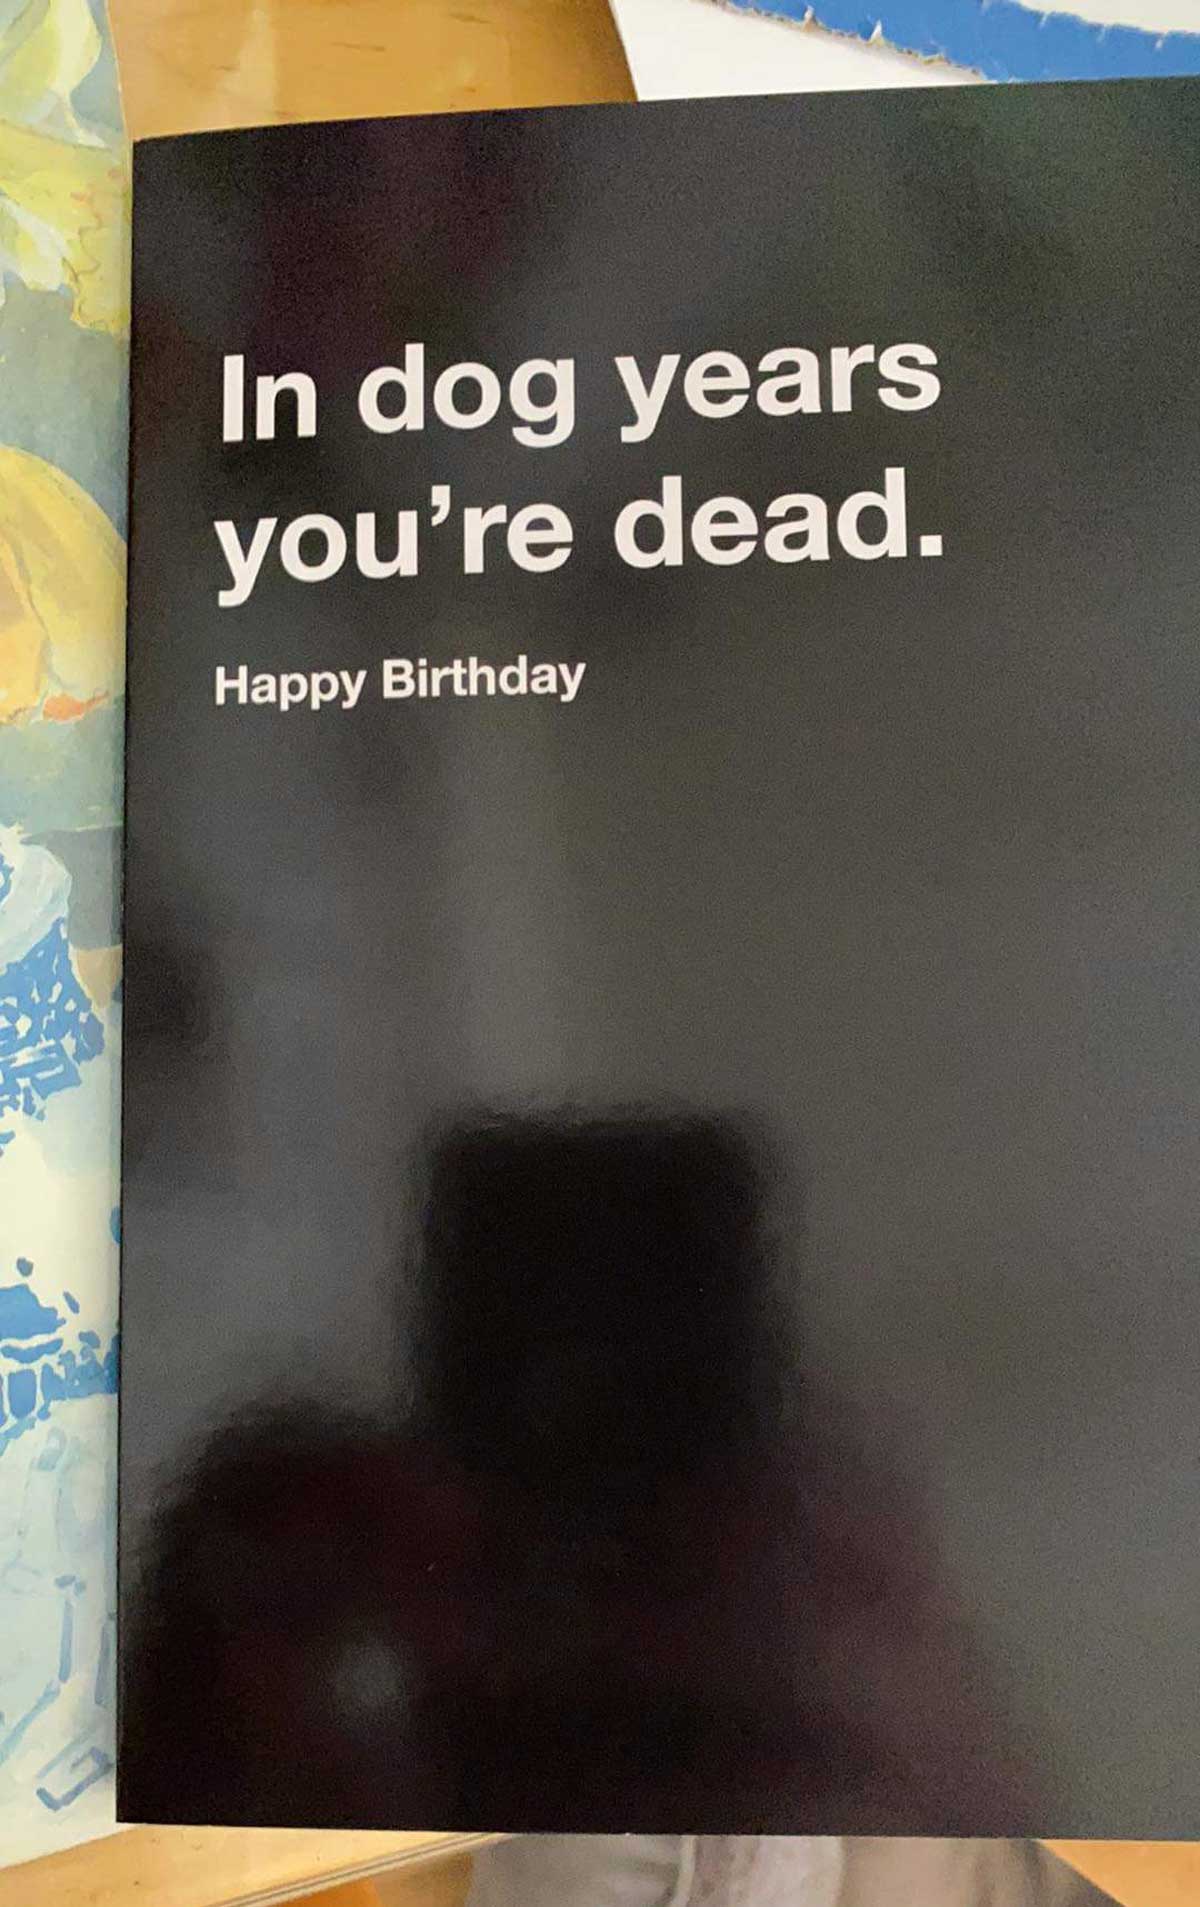 The card I got my dad for his 69th birthday, he loved it.